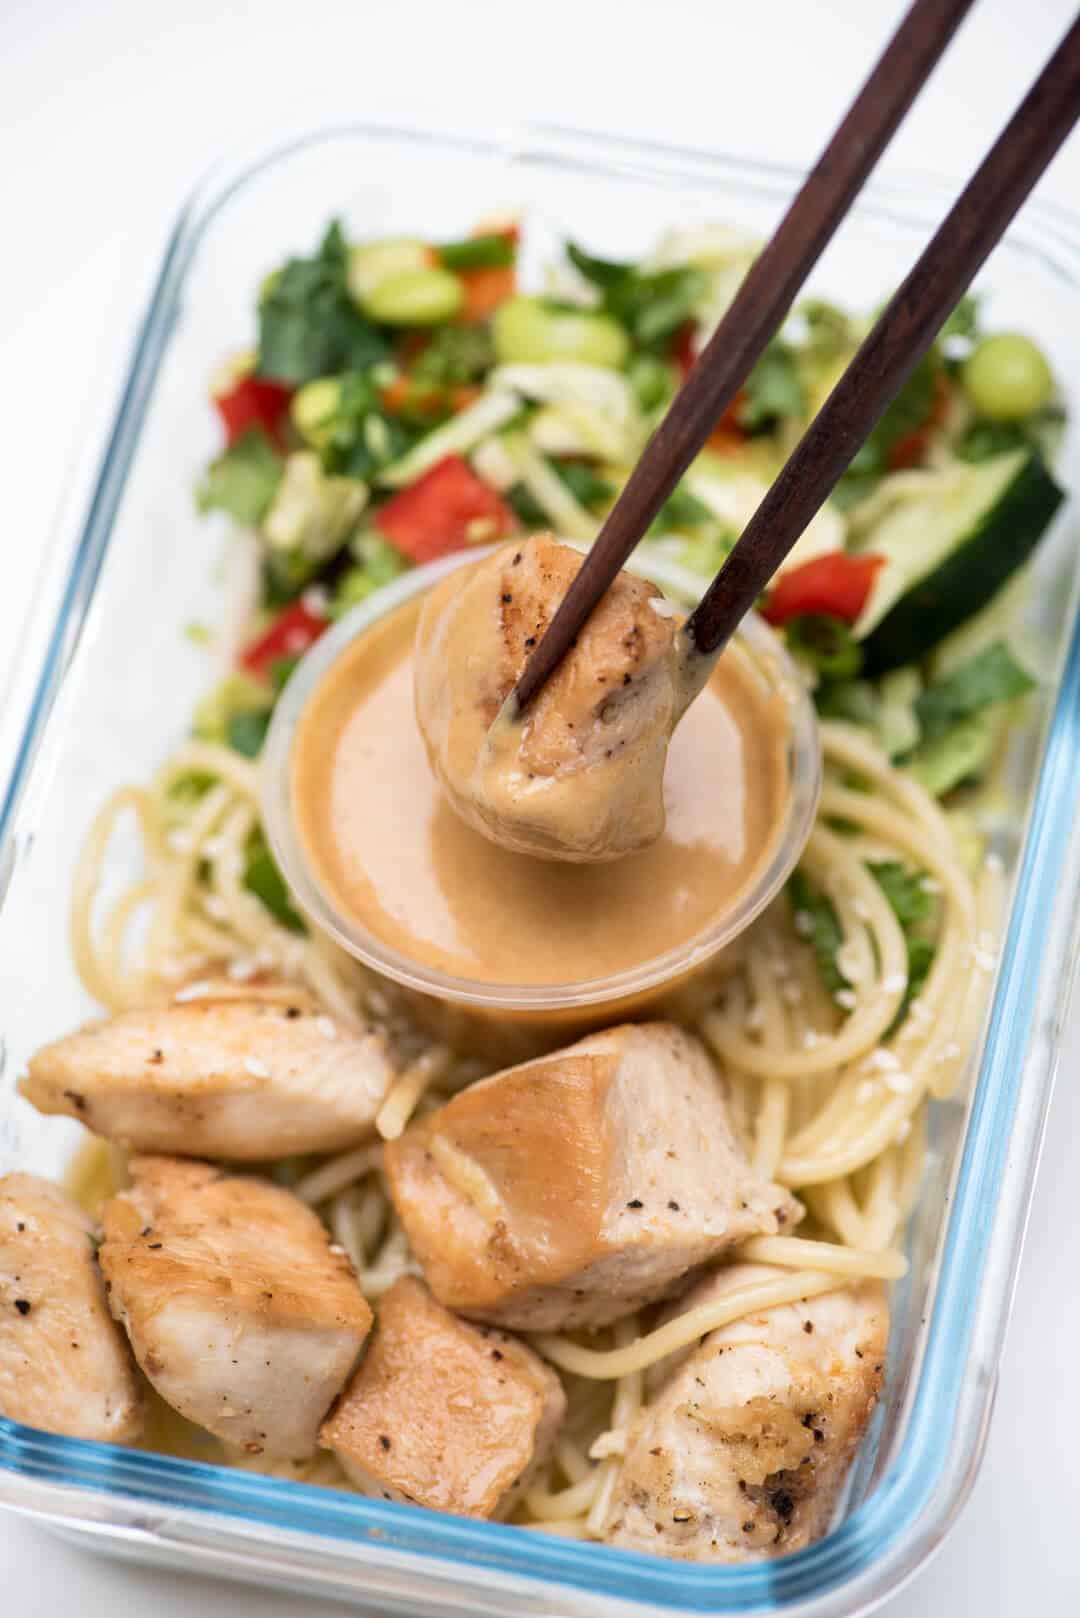 Chopsticks dip a piece of chicken into peanut sauce in the meal prep container.